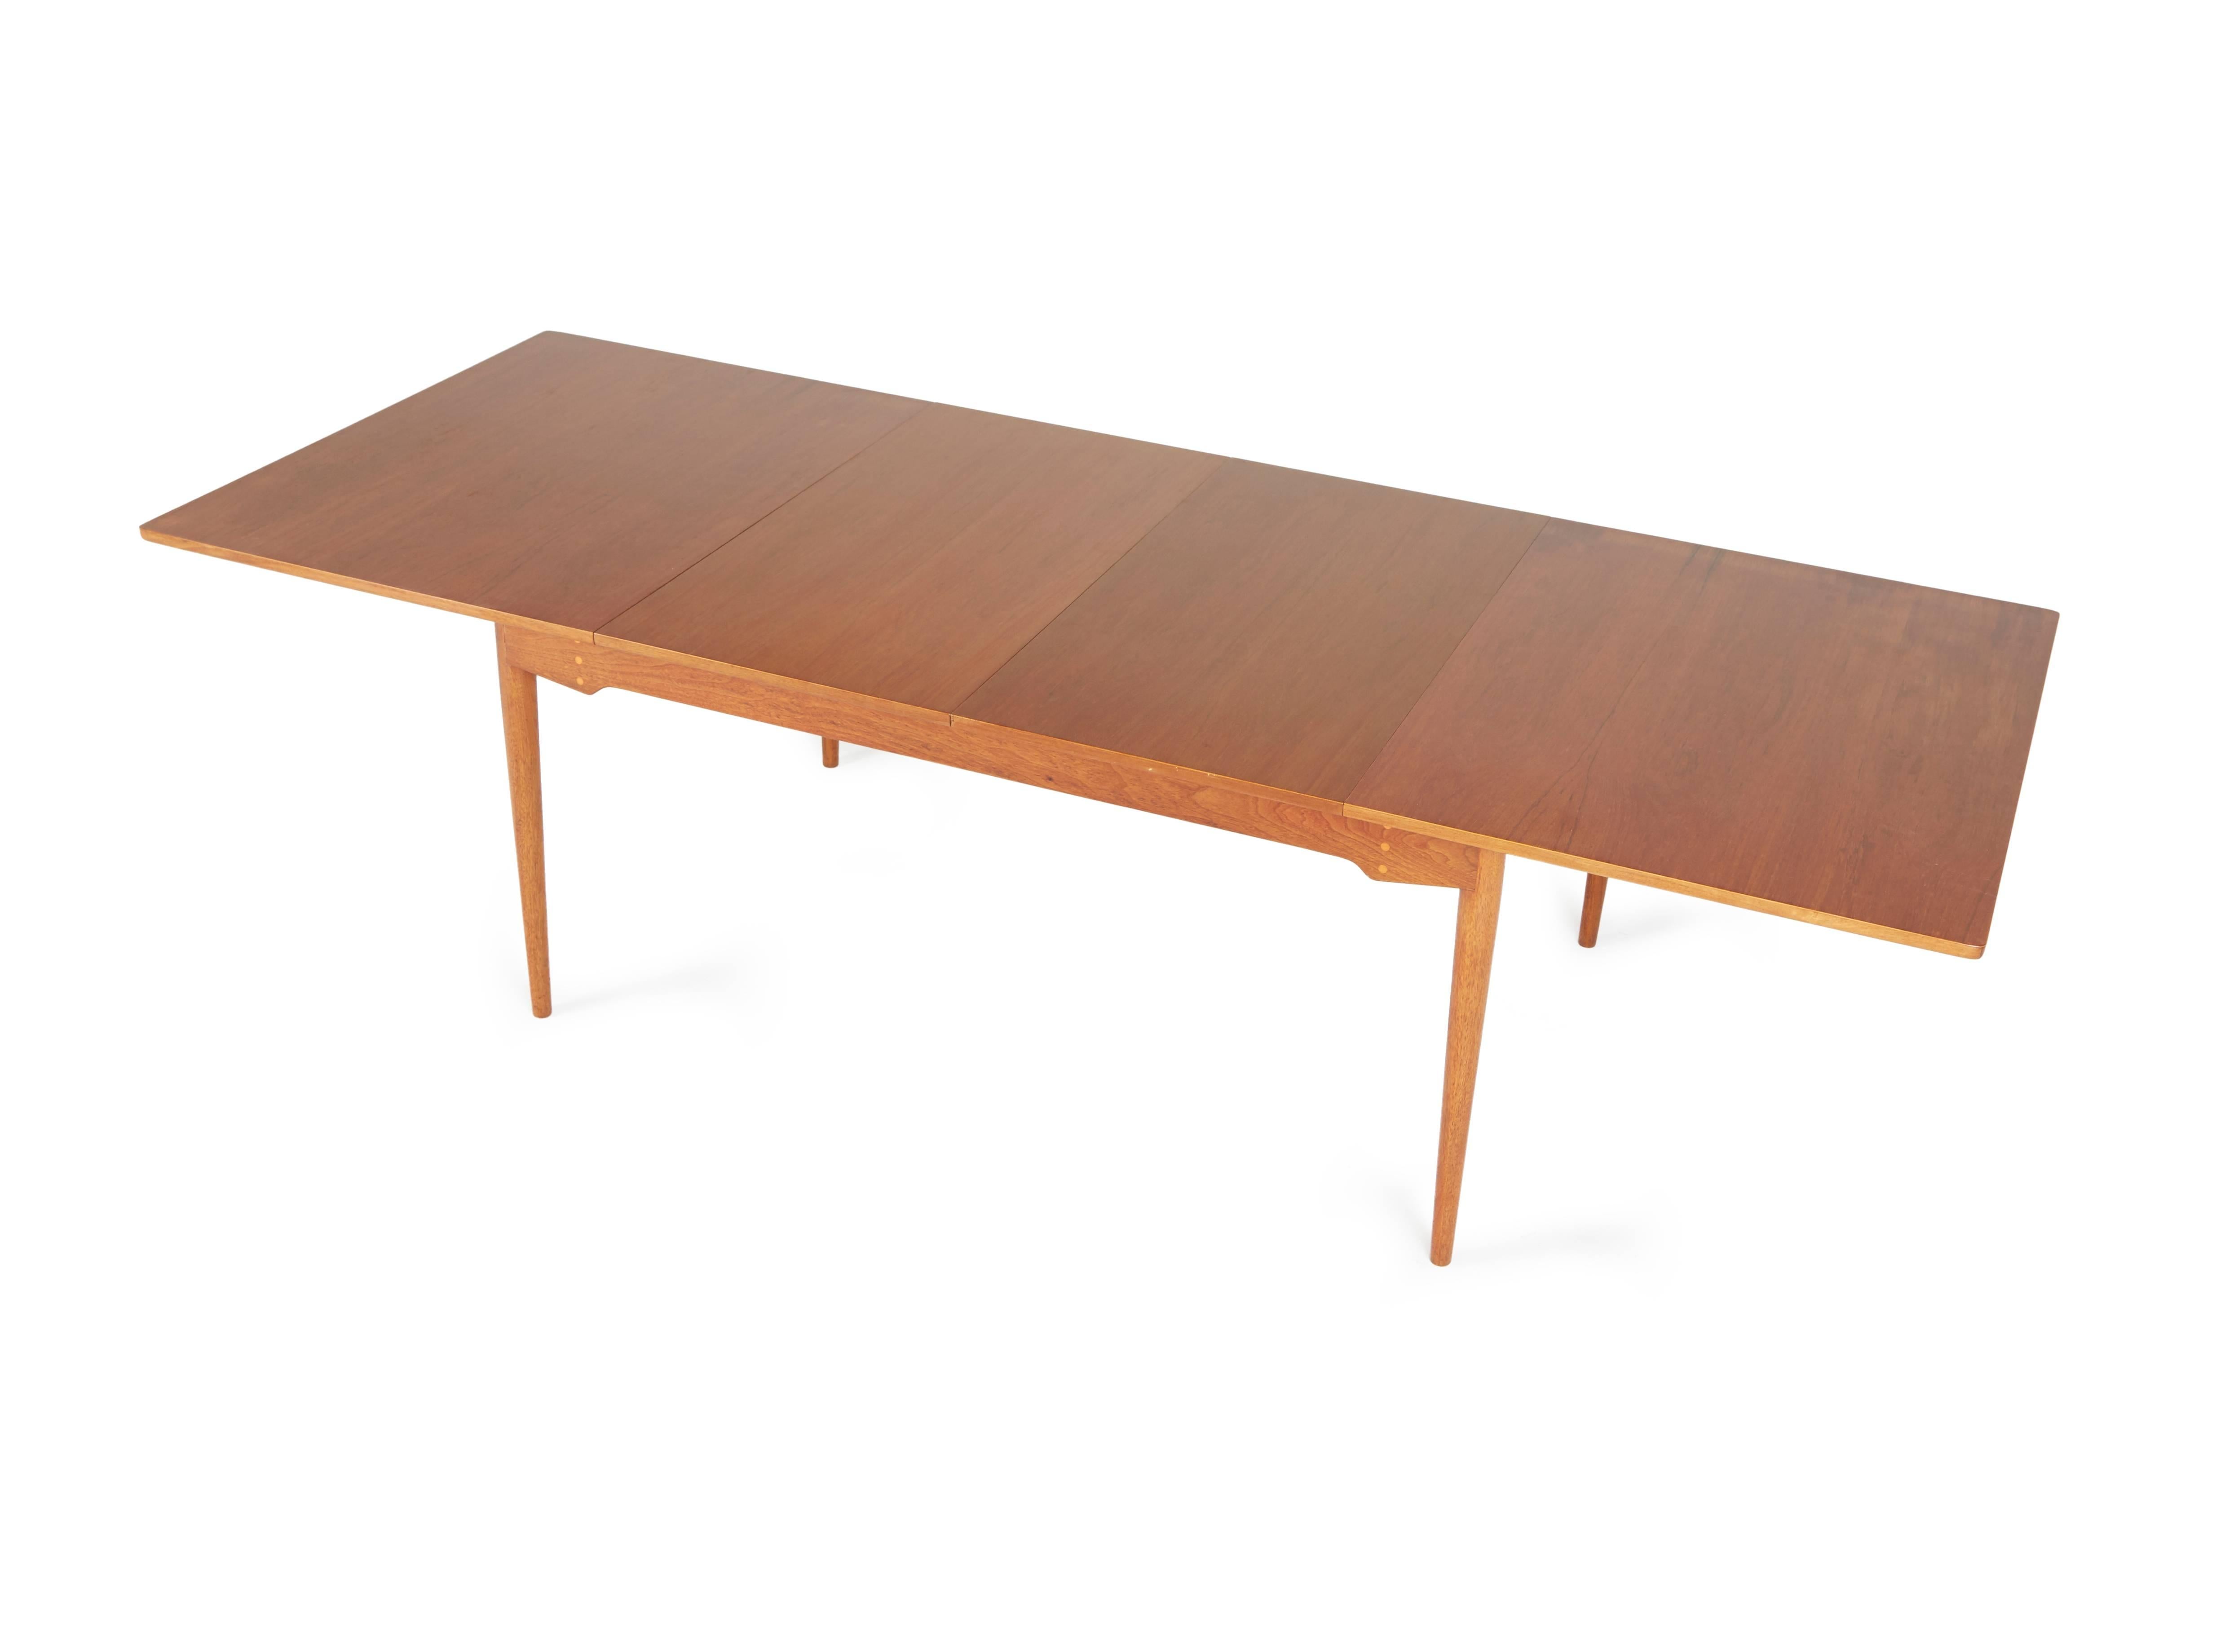 An original 1960s extendable dining table by Finn Juhl, designed for Baker Furniture. This Classic Baker / Juhl example is comprised of a solid teak frame and top. 

Complete with two 22" self-storing leaves that hide under the main tabletop,